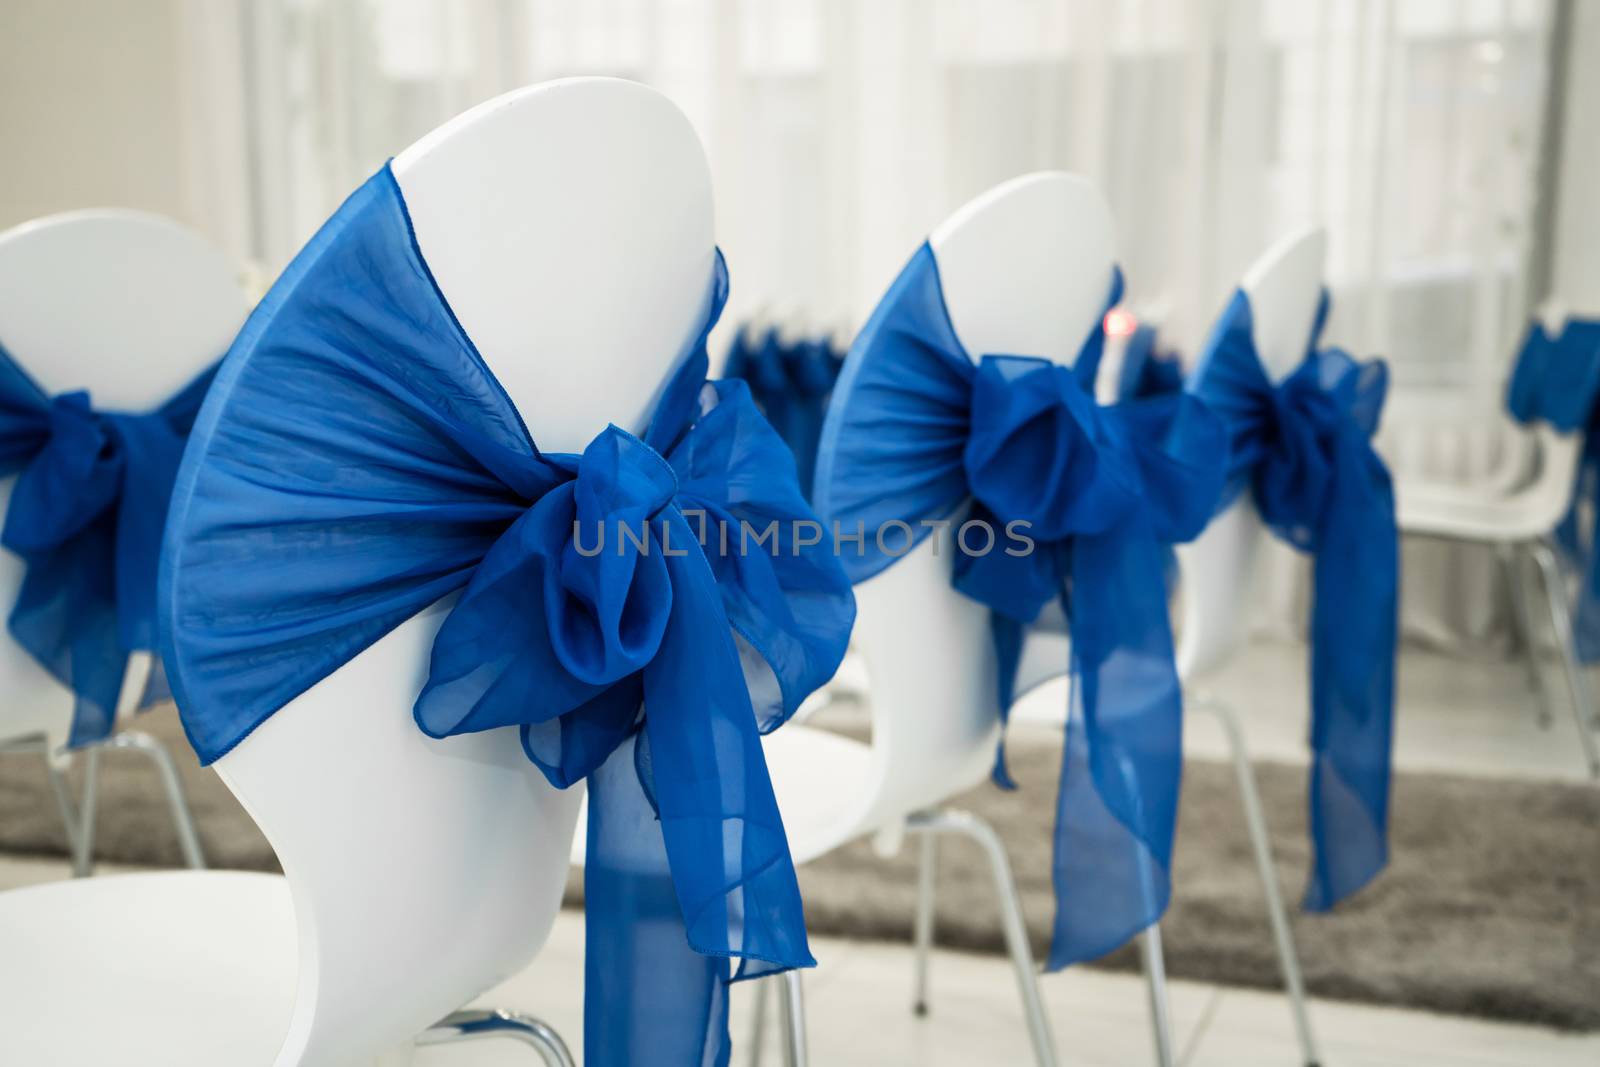 Bright room for weddings. Rows of guest chairs decorated with blue cloth.